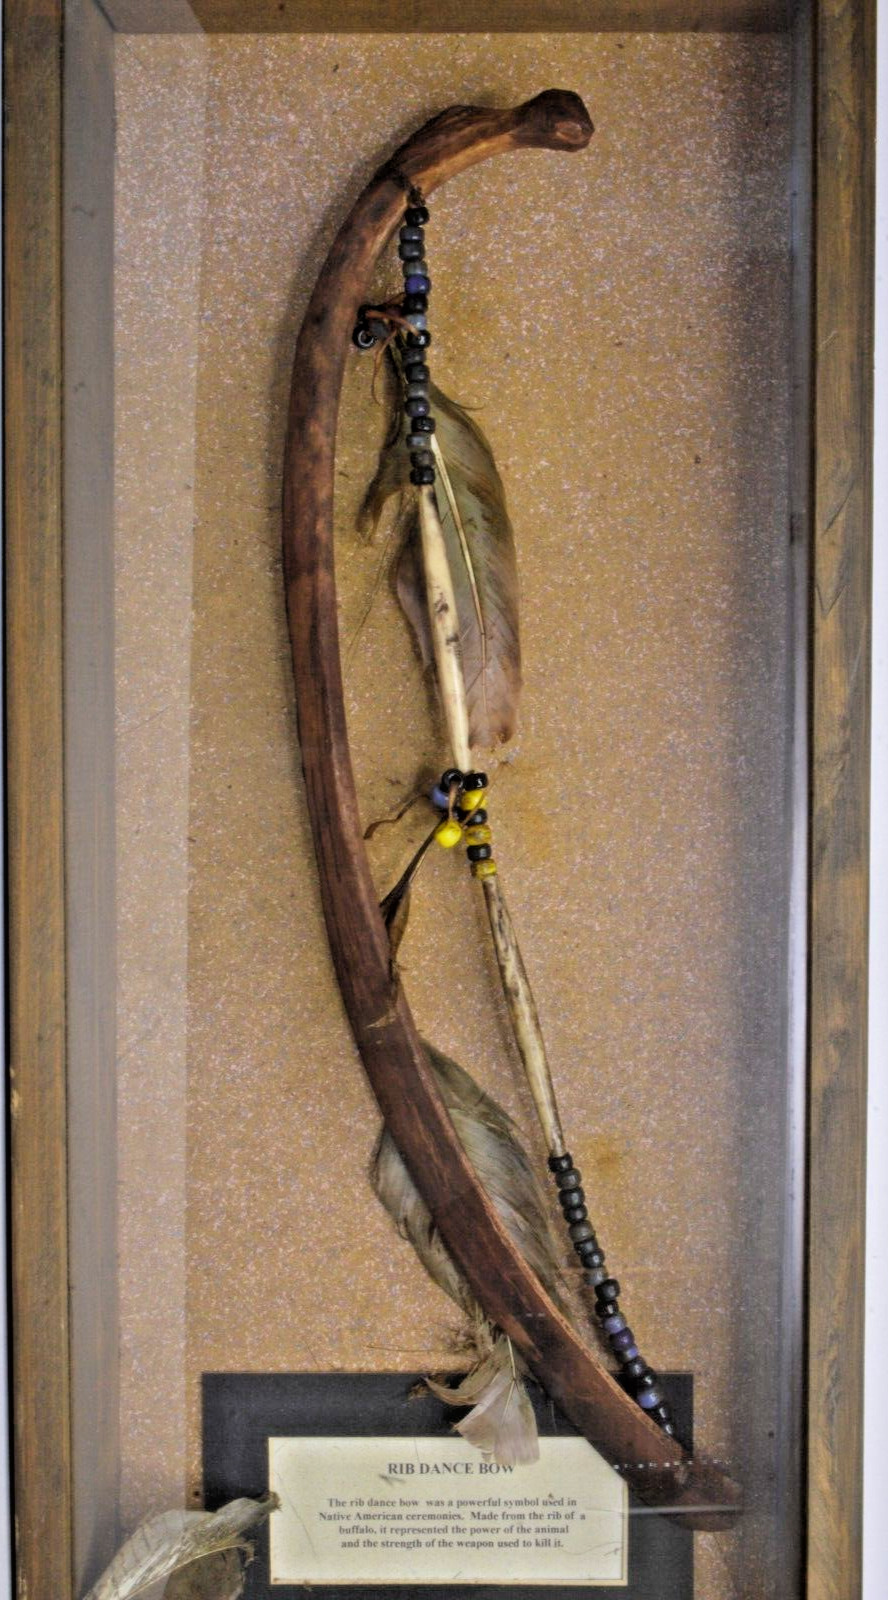 Authentic Native American Indian Territory, Handcrafted Buffalo Rib Dance Bow